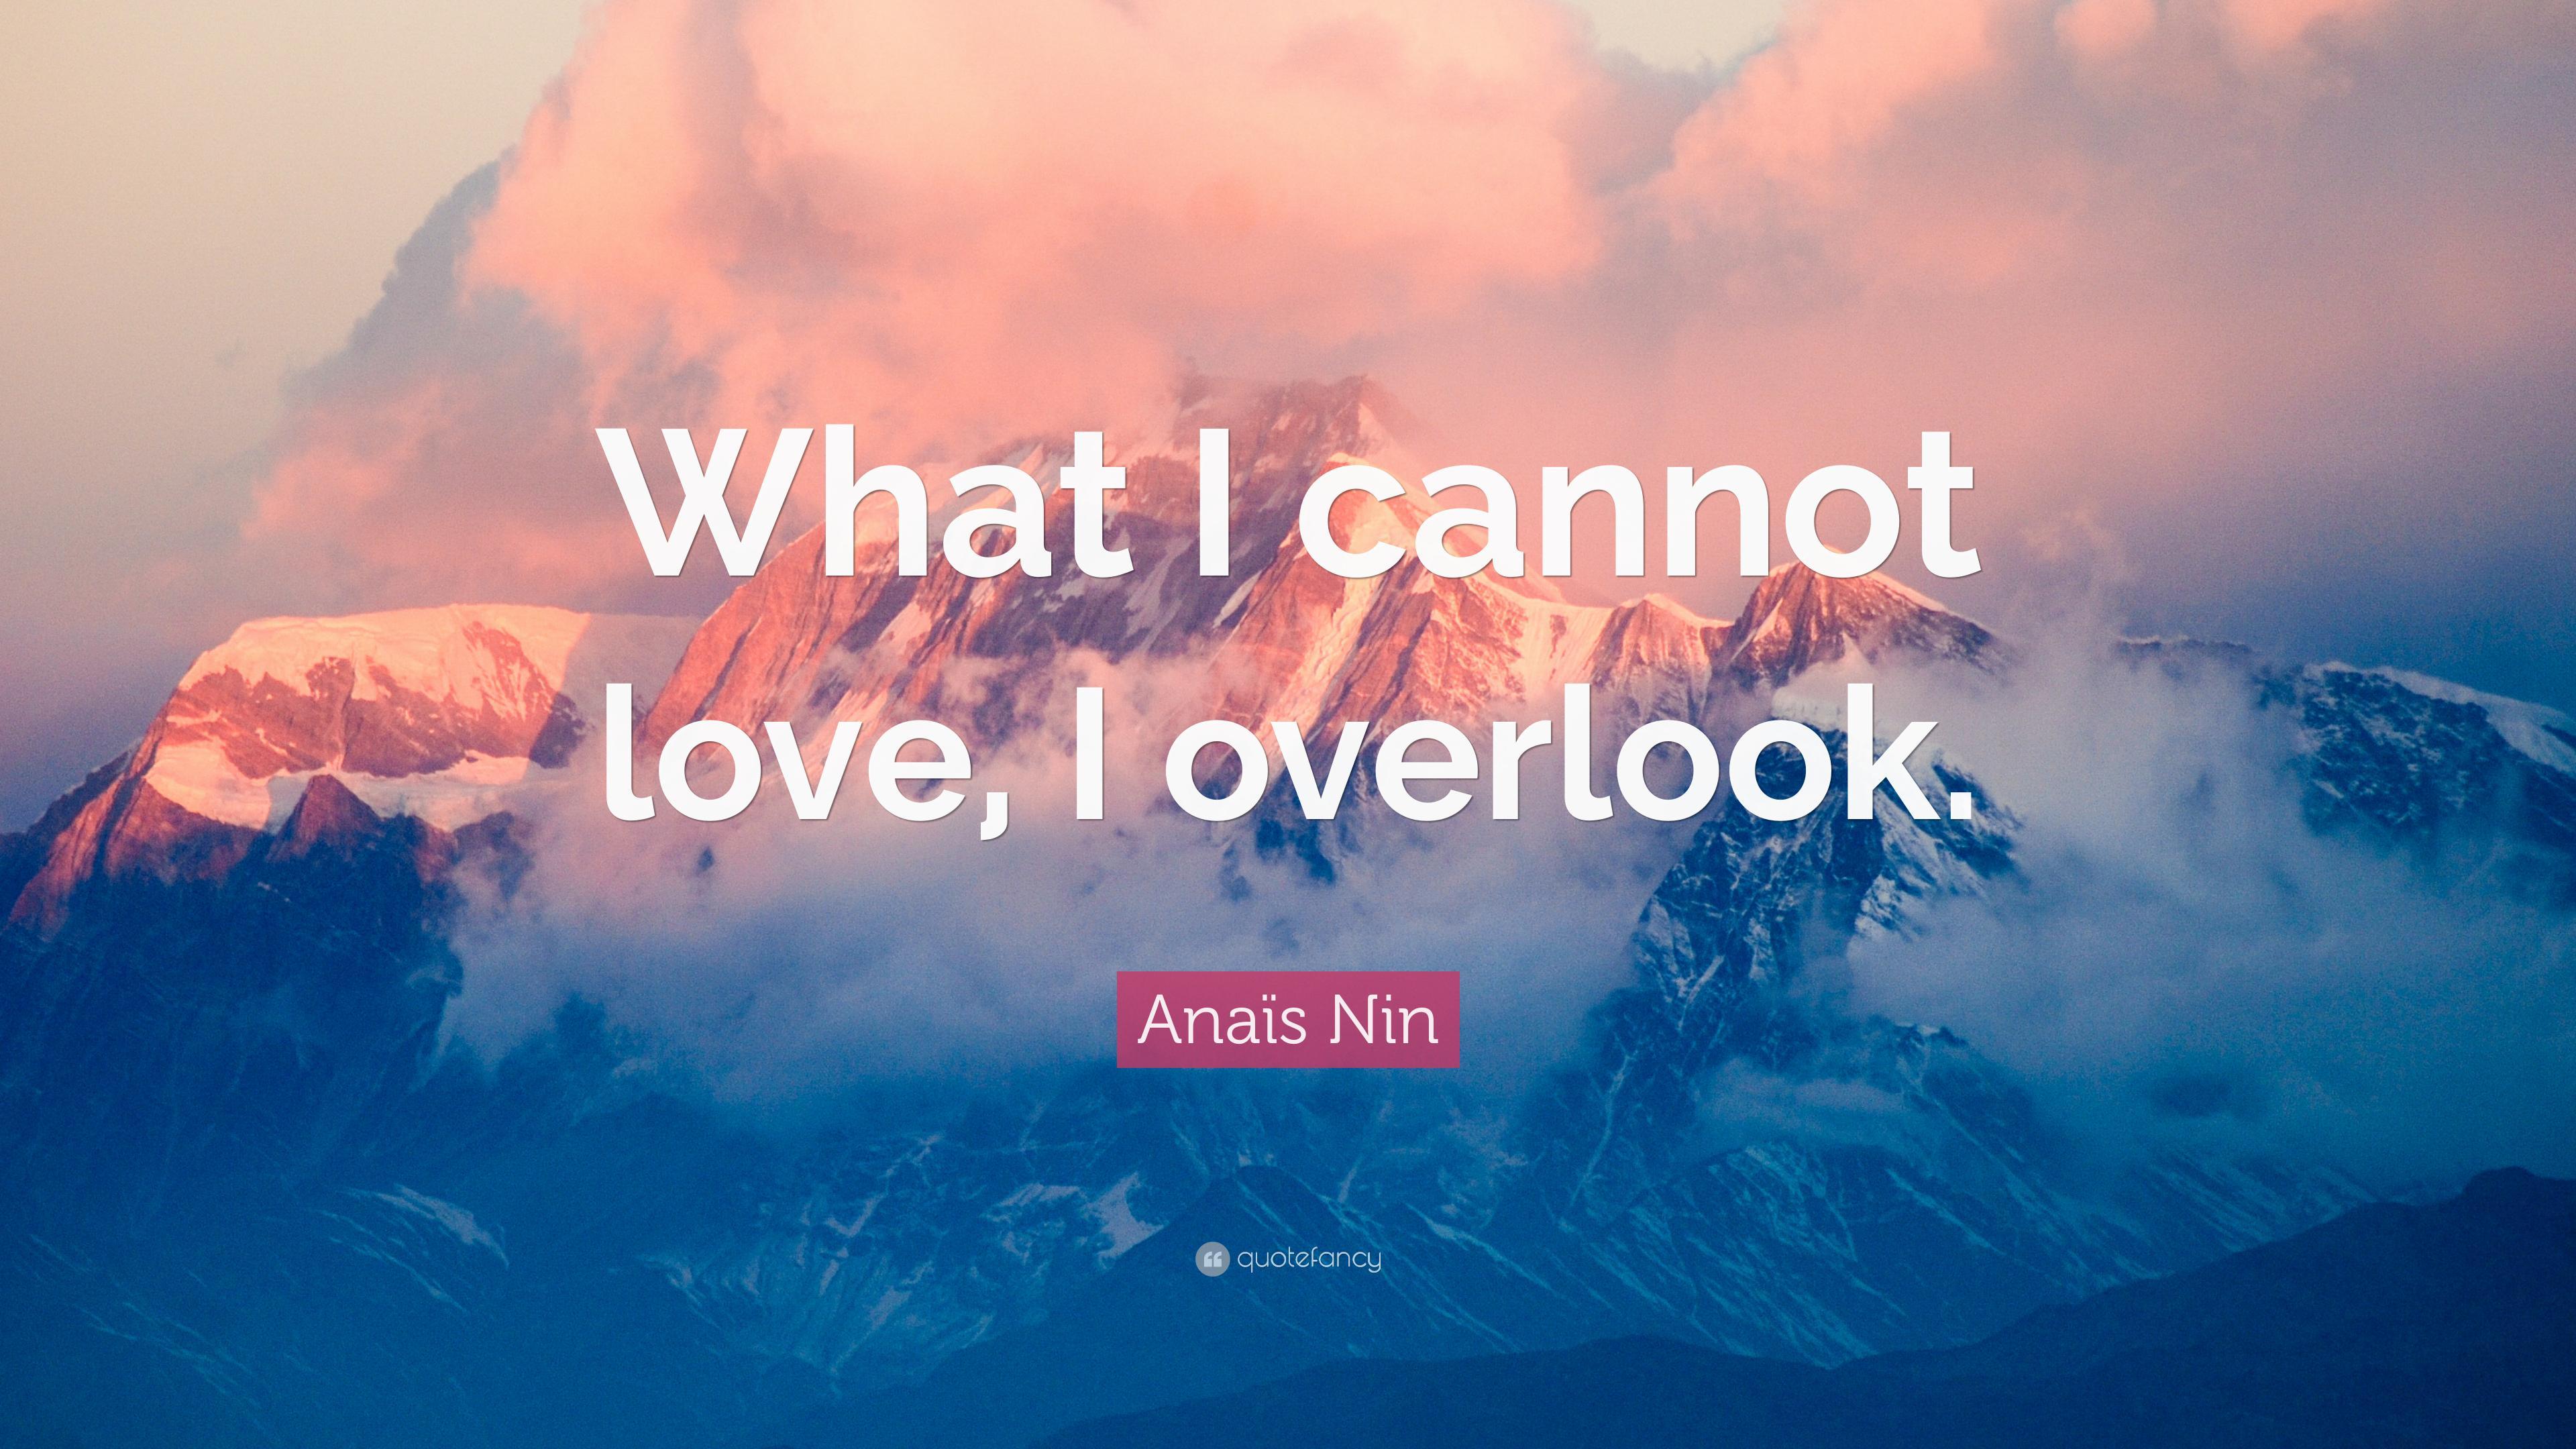 Anaïs Nin Quote: “What I cannot love, I overlook.” 12 wallpaper